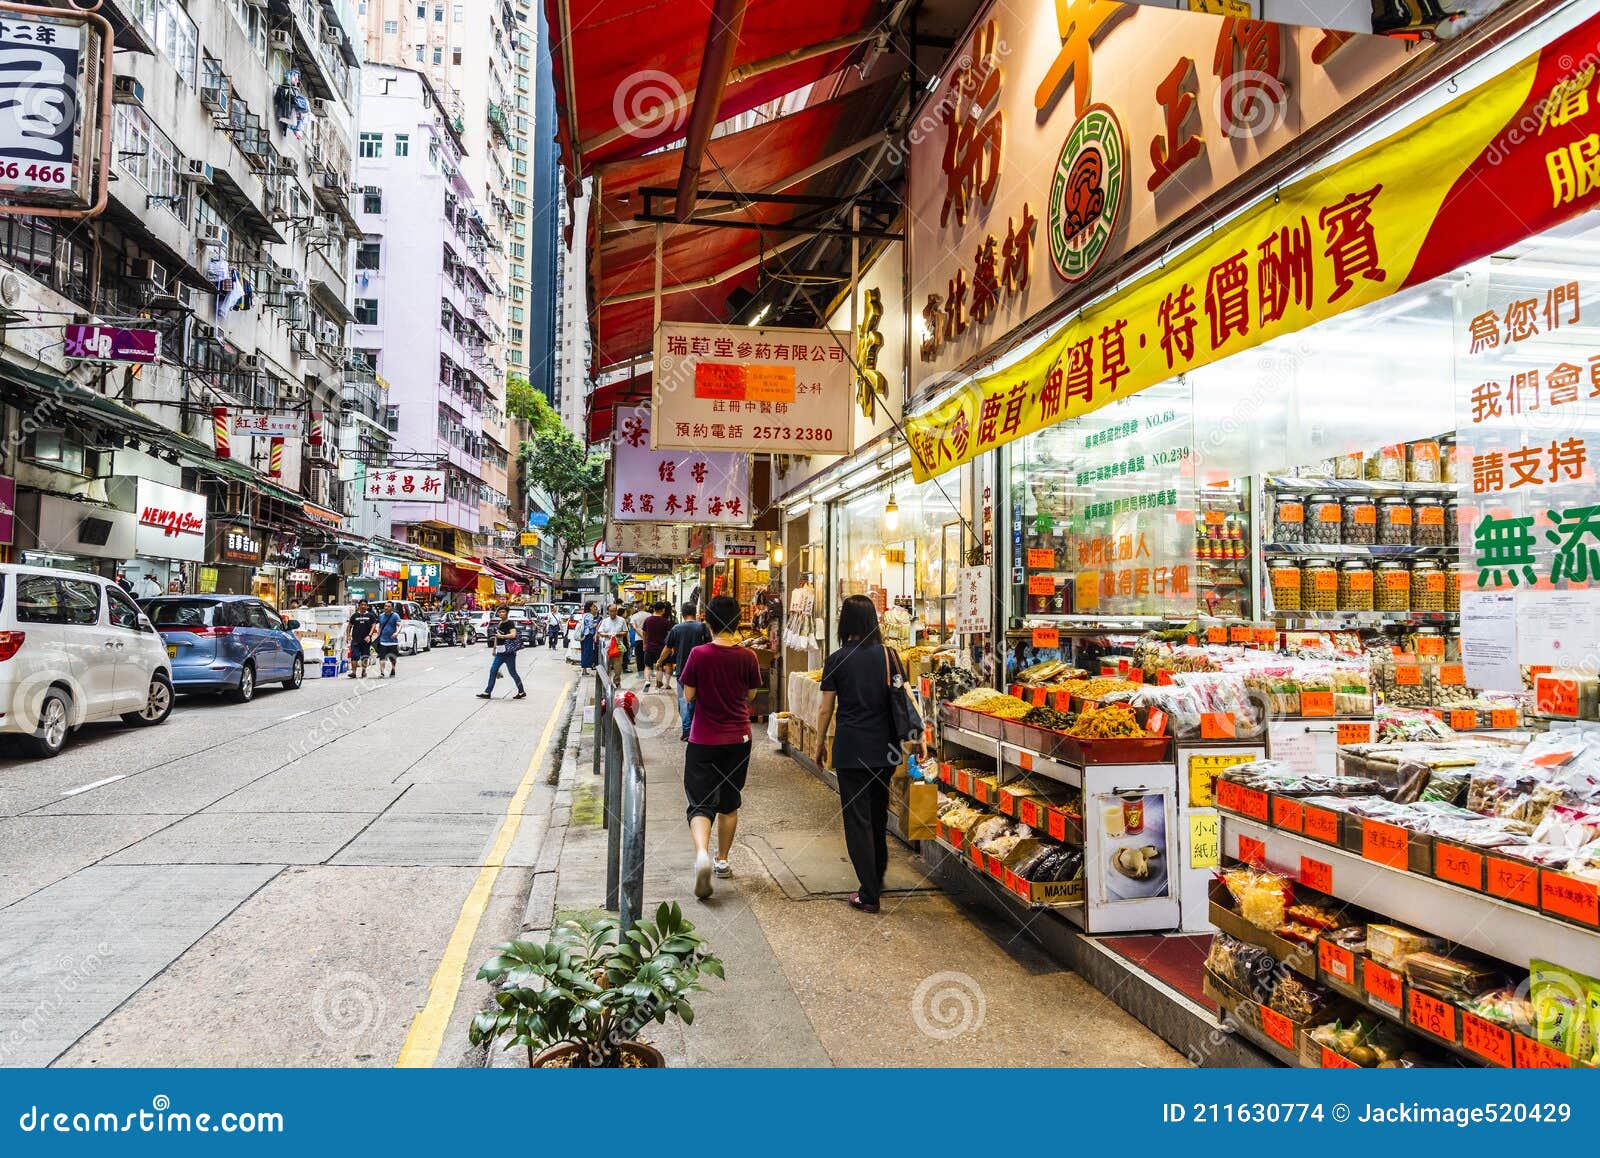 Scenes Of The Traditional Market On Wan Chai Street Hong Kong